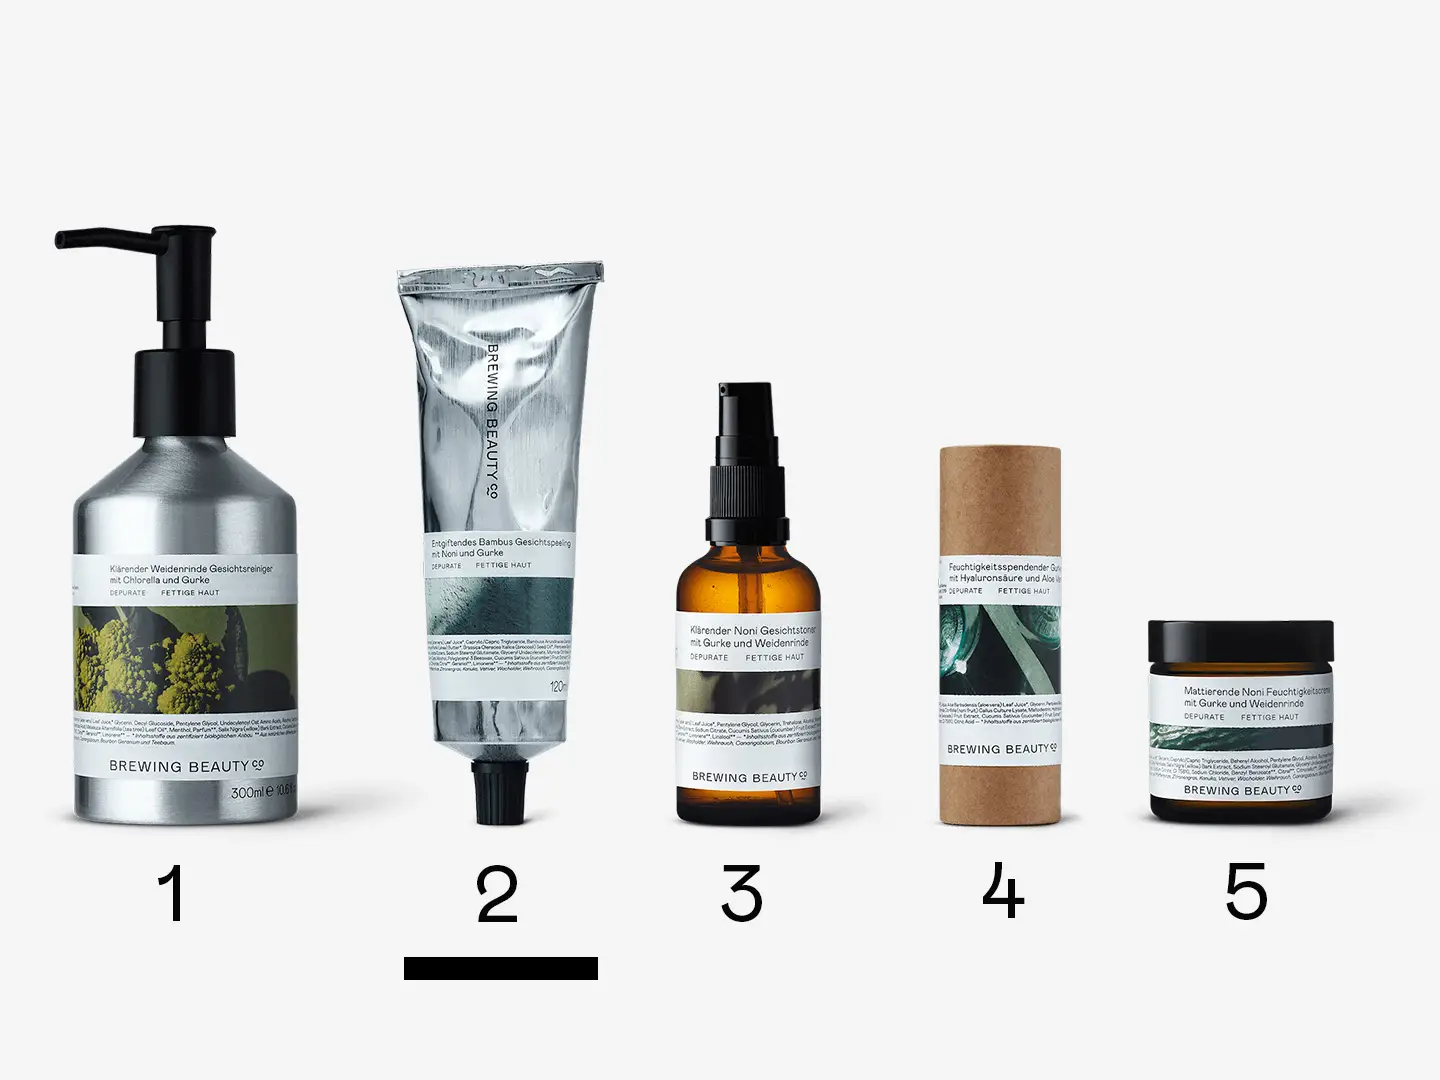 A lineup of Brewing Beauty products representing Routine No.21 